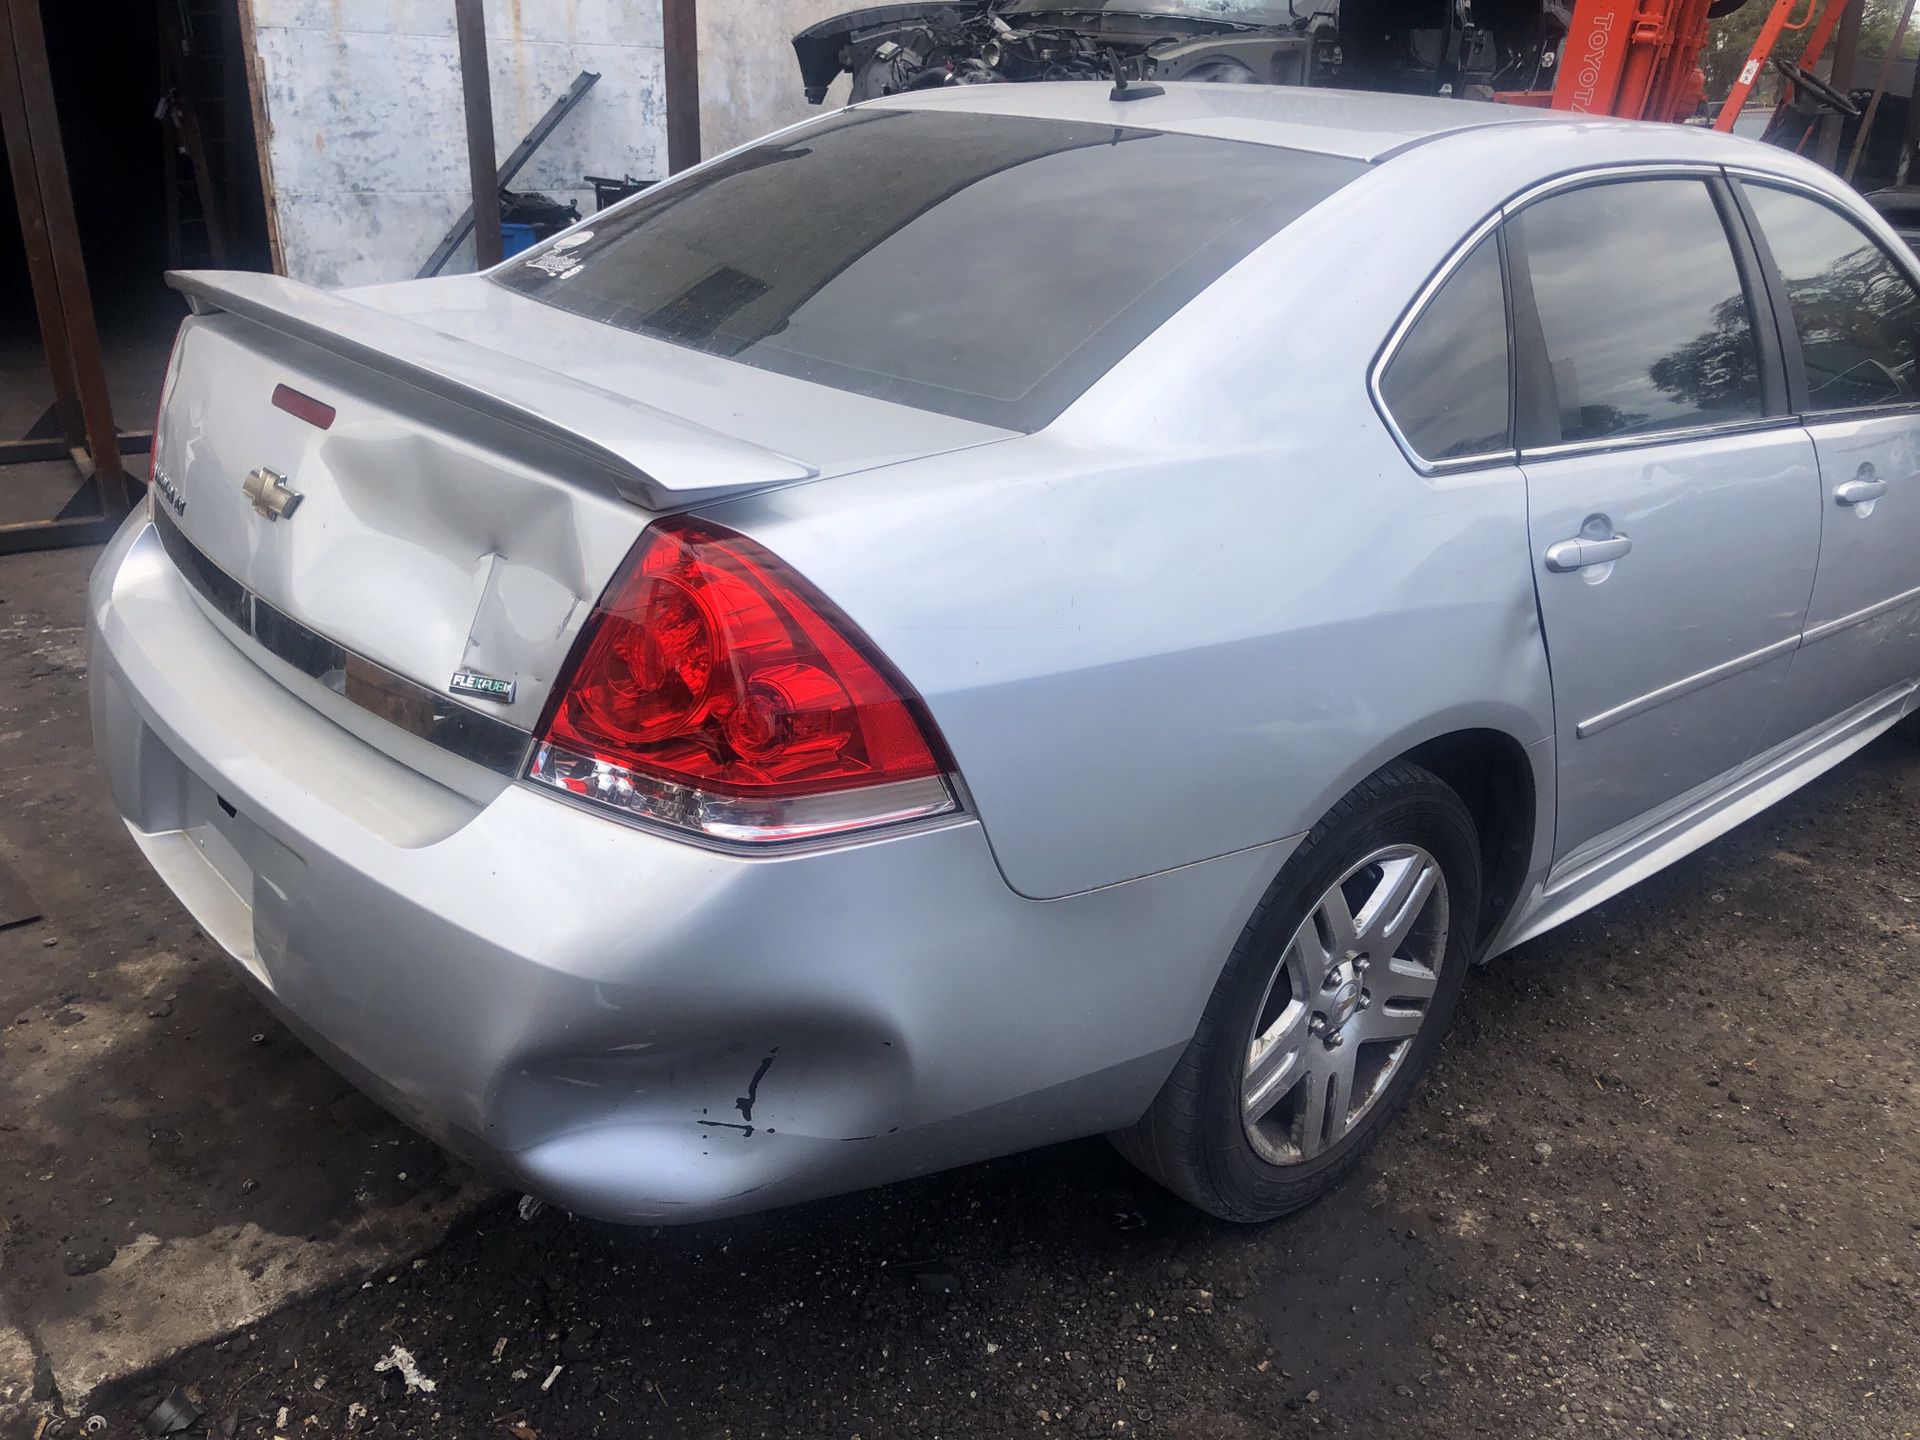 2010 Chevy Impala. Parts Only